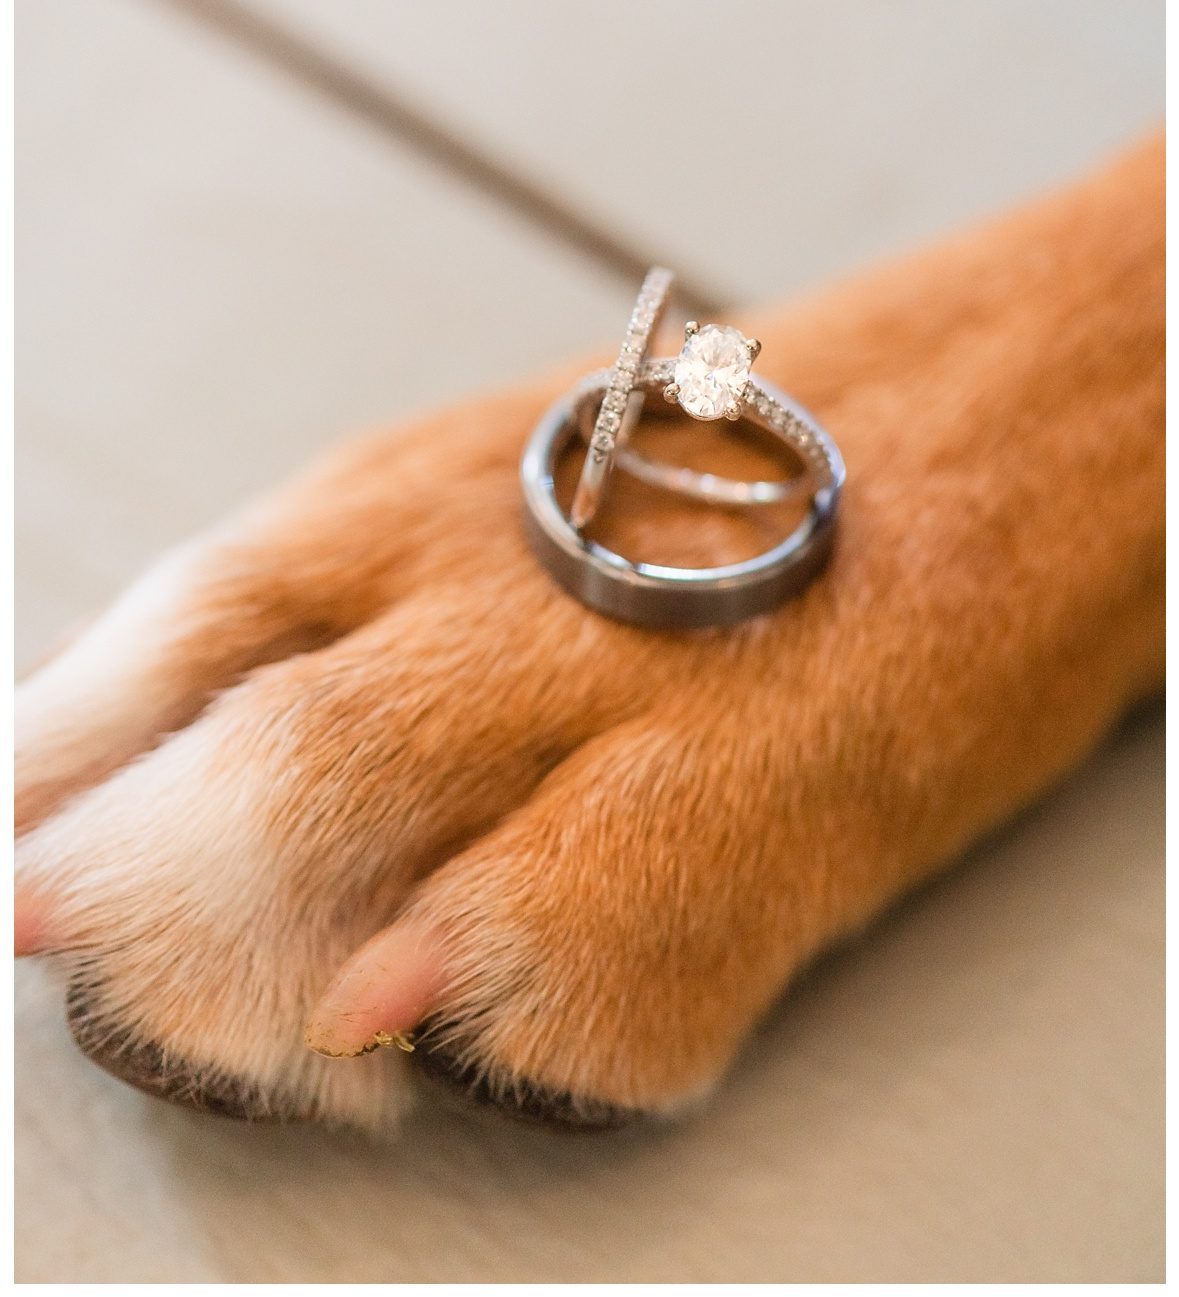 Chattanooga photographer who loves animals with wedding rings balanced on dog paw